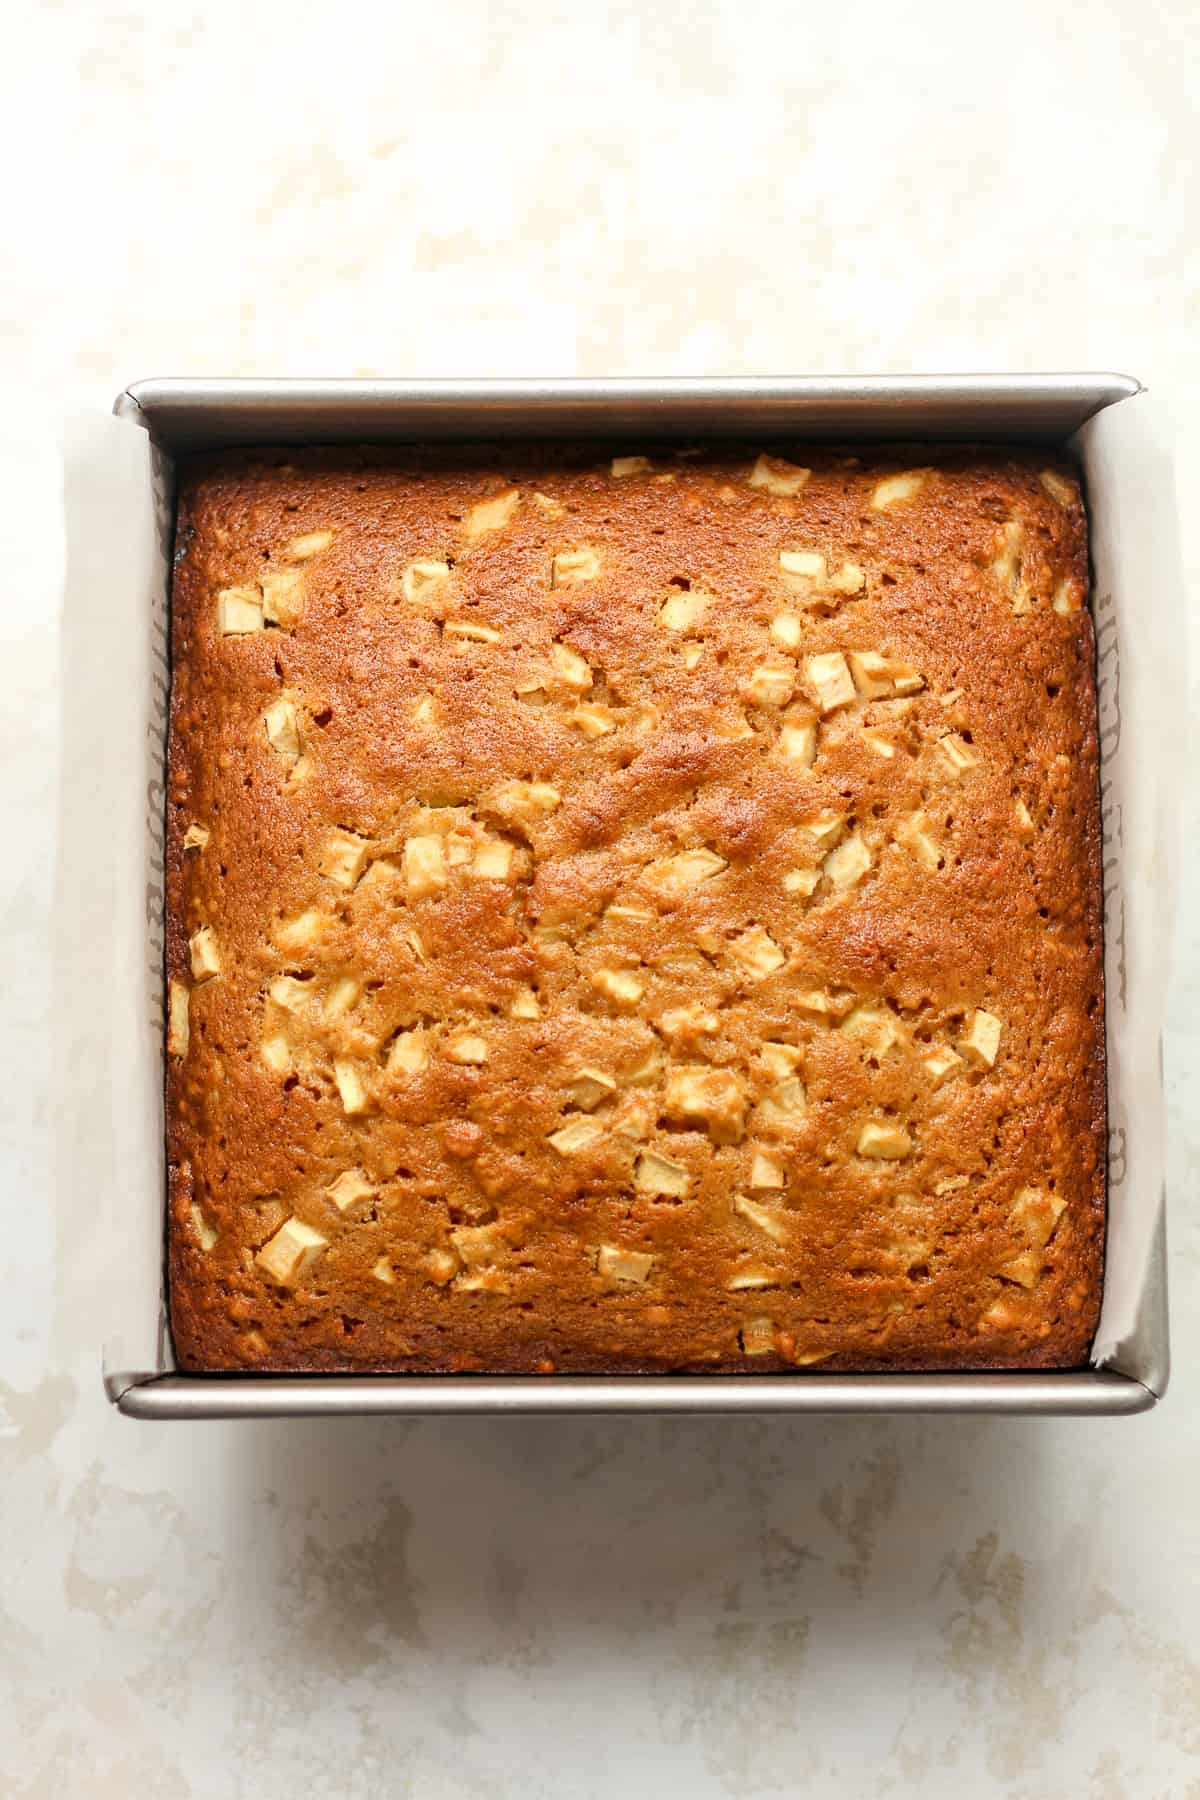 A square cake pan with a baked applesauce cake.